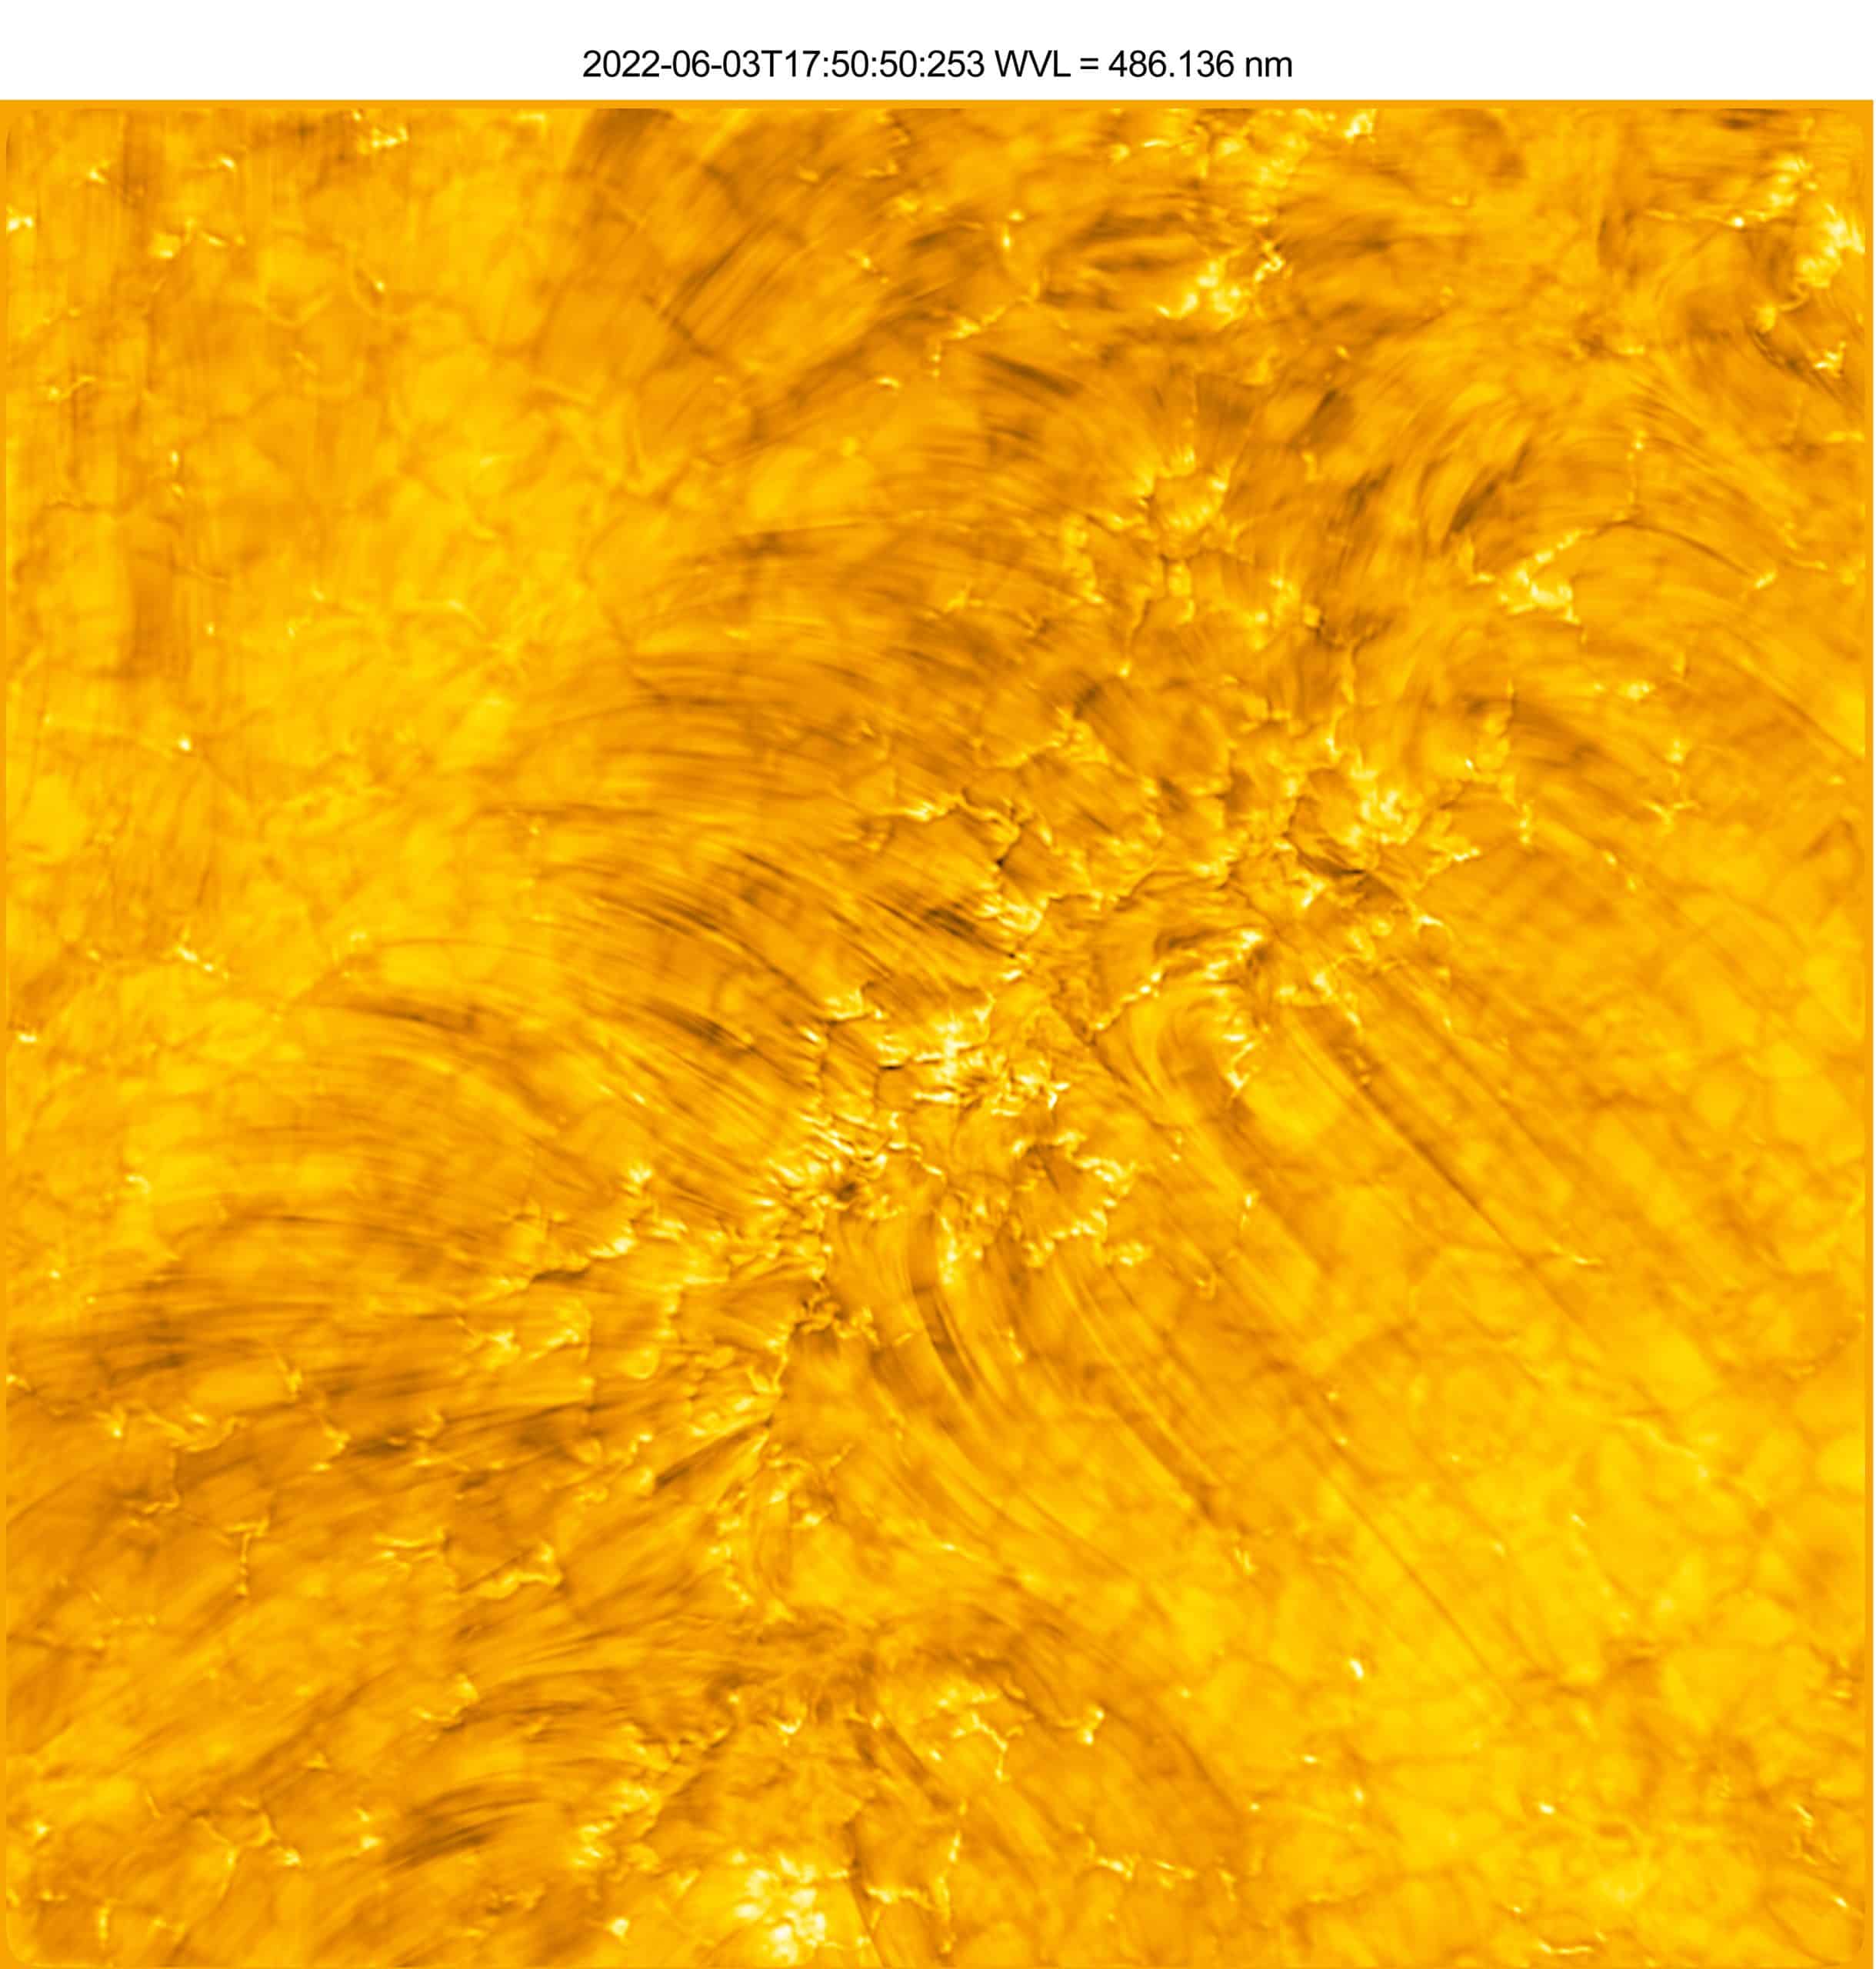 The lower atmosphere (chromosphere) of the Sun exists above the Sun’s surface (photosphere). In this image, the fibrillar nature of the solar atmosphere is exemplified. Dark, fine threads (fibrils) are ubiquitous in the chromosphere. The outline of bright structures are signature of the presence of magnetic fields in the photosphere below. This image was captured by the Inouye Solar Telescope during a coordinated observation campaign with NASA’s Parker Solar Probe and ESA’s Solar Orbiter. Image Title: Detailed View of the Solar Atmosphere PID: PID_1_118 Large Field of View: 30,720km x 30,720km Image Credit: NSF/AURA/NSO Image Processing: Friedrich Wöger(NSO), Catherine Fischer (NSO) Science Credit: Public DDT Data